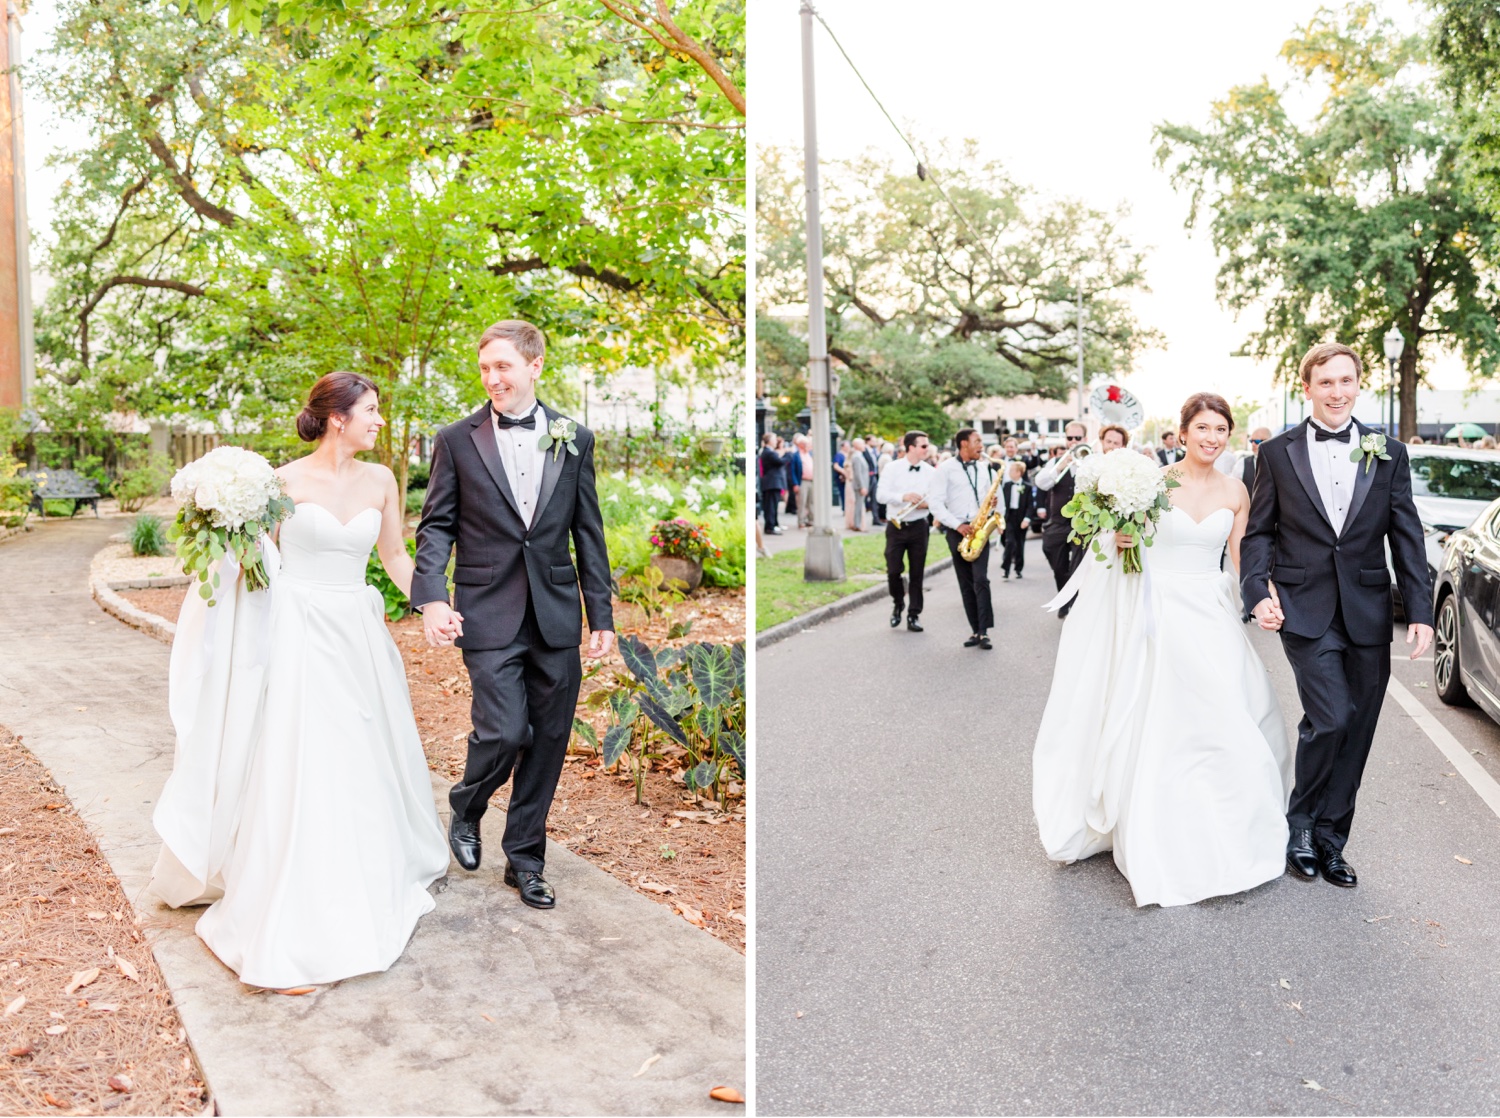 Photography By Toni Bride & Groom Photos